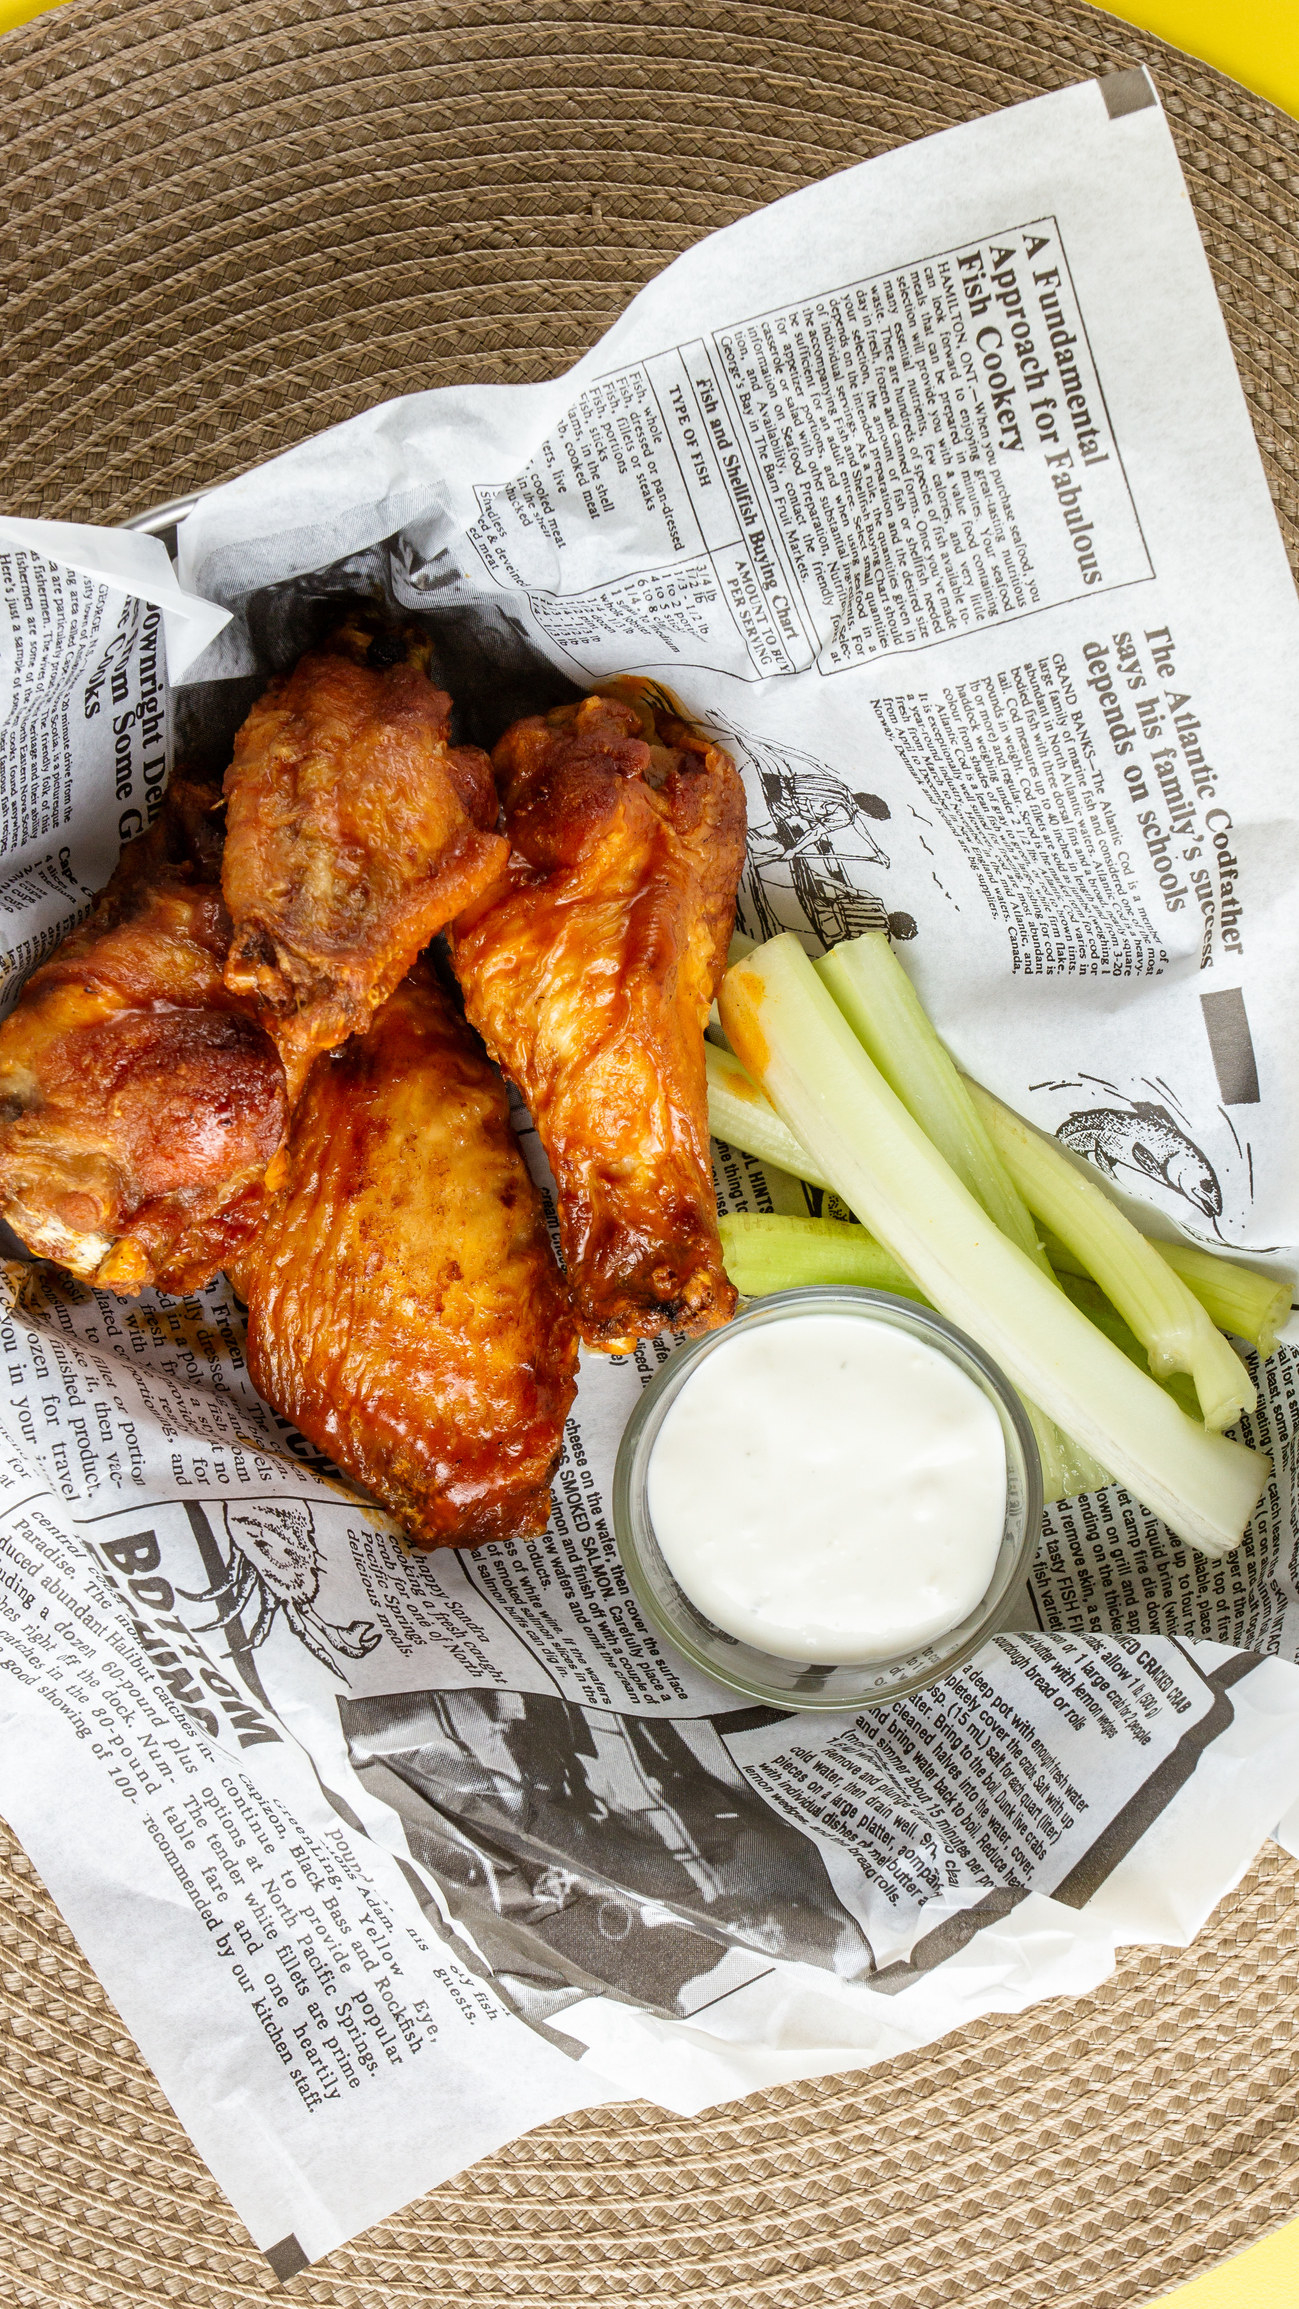 Buffalo wings with celery and dipping sauce